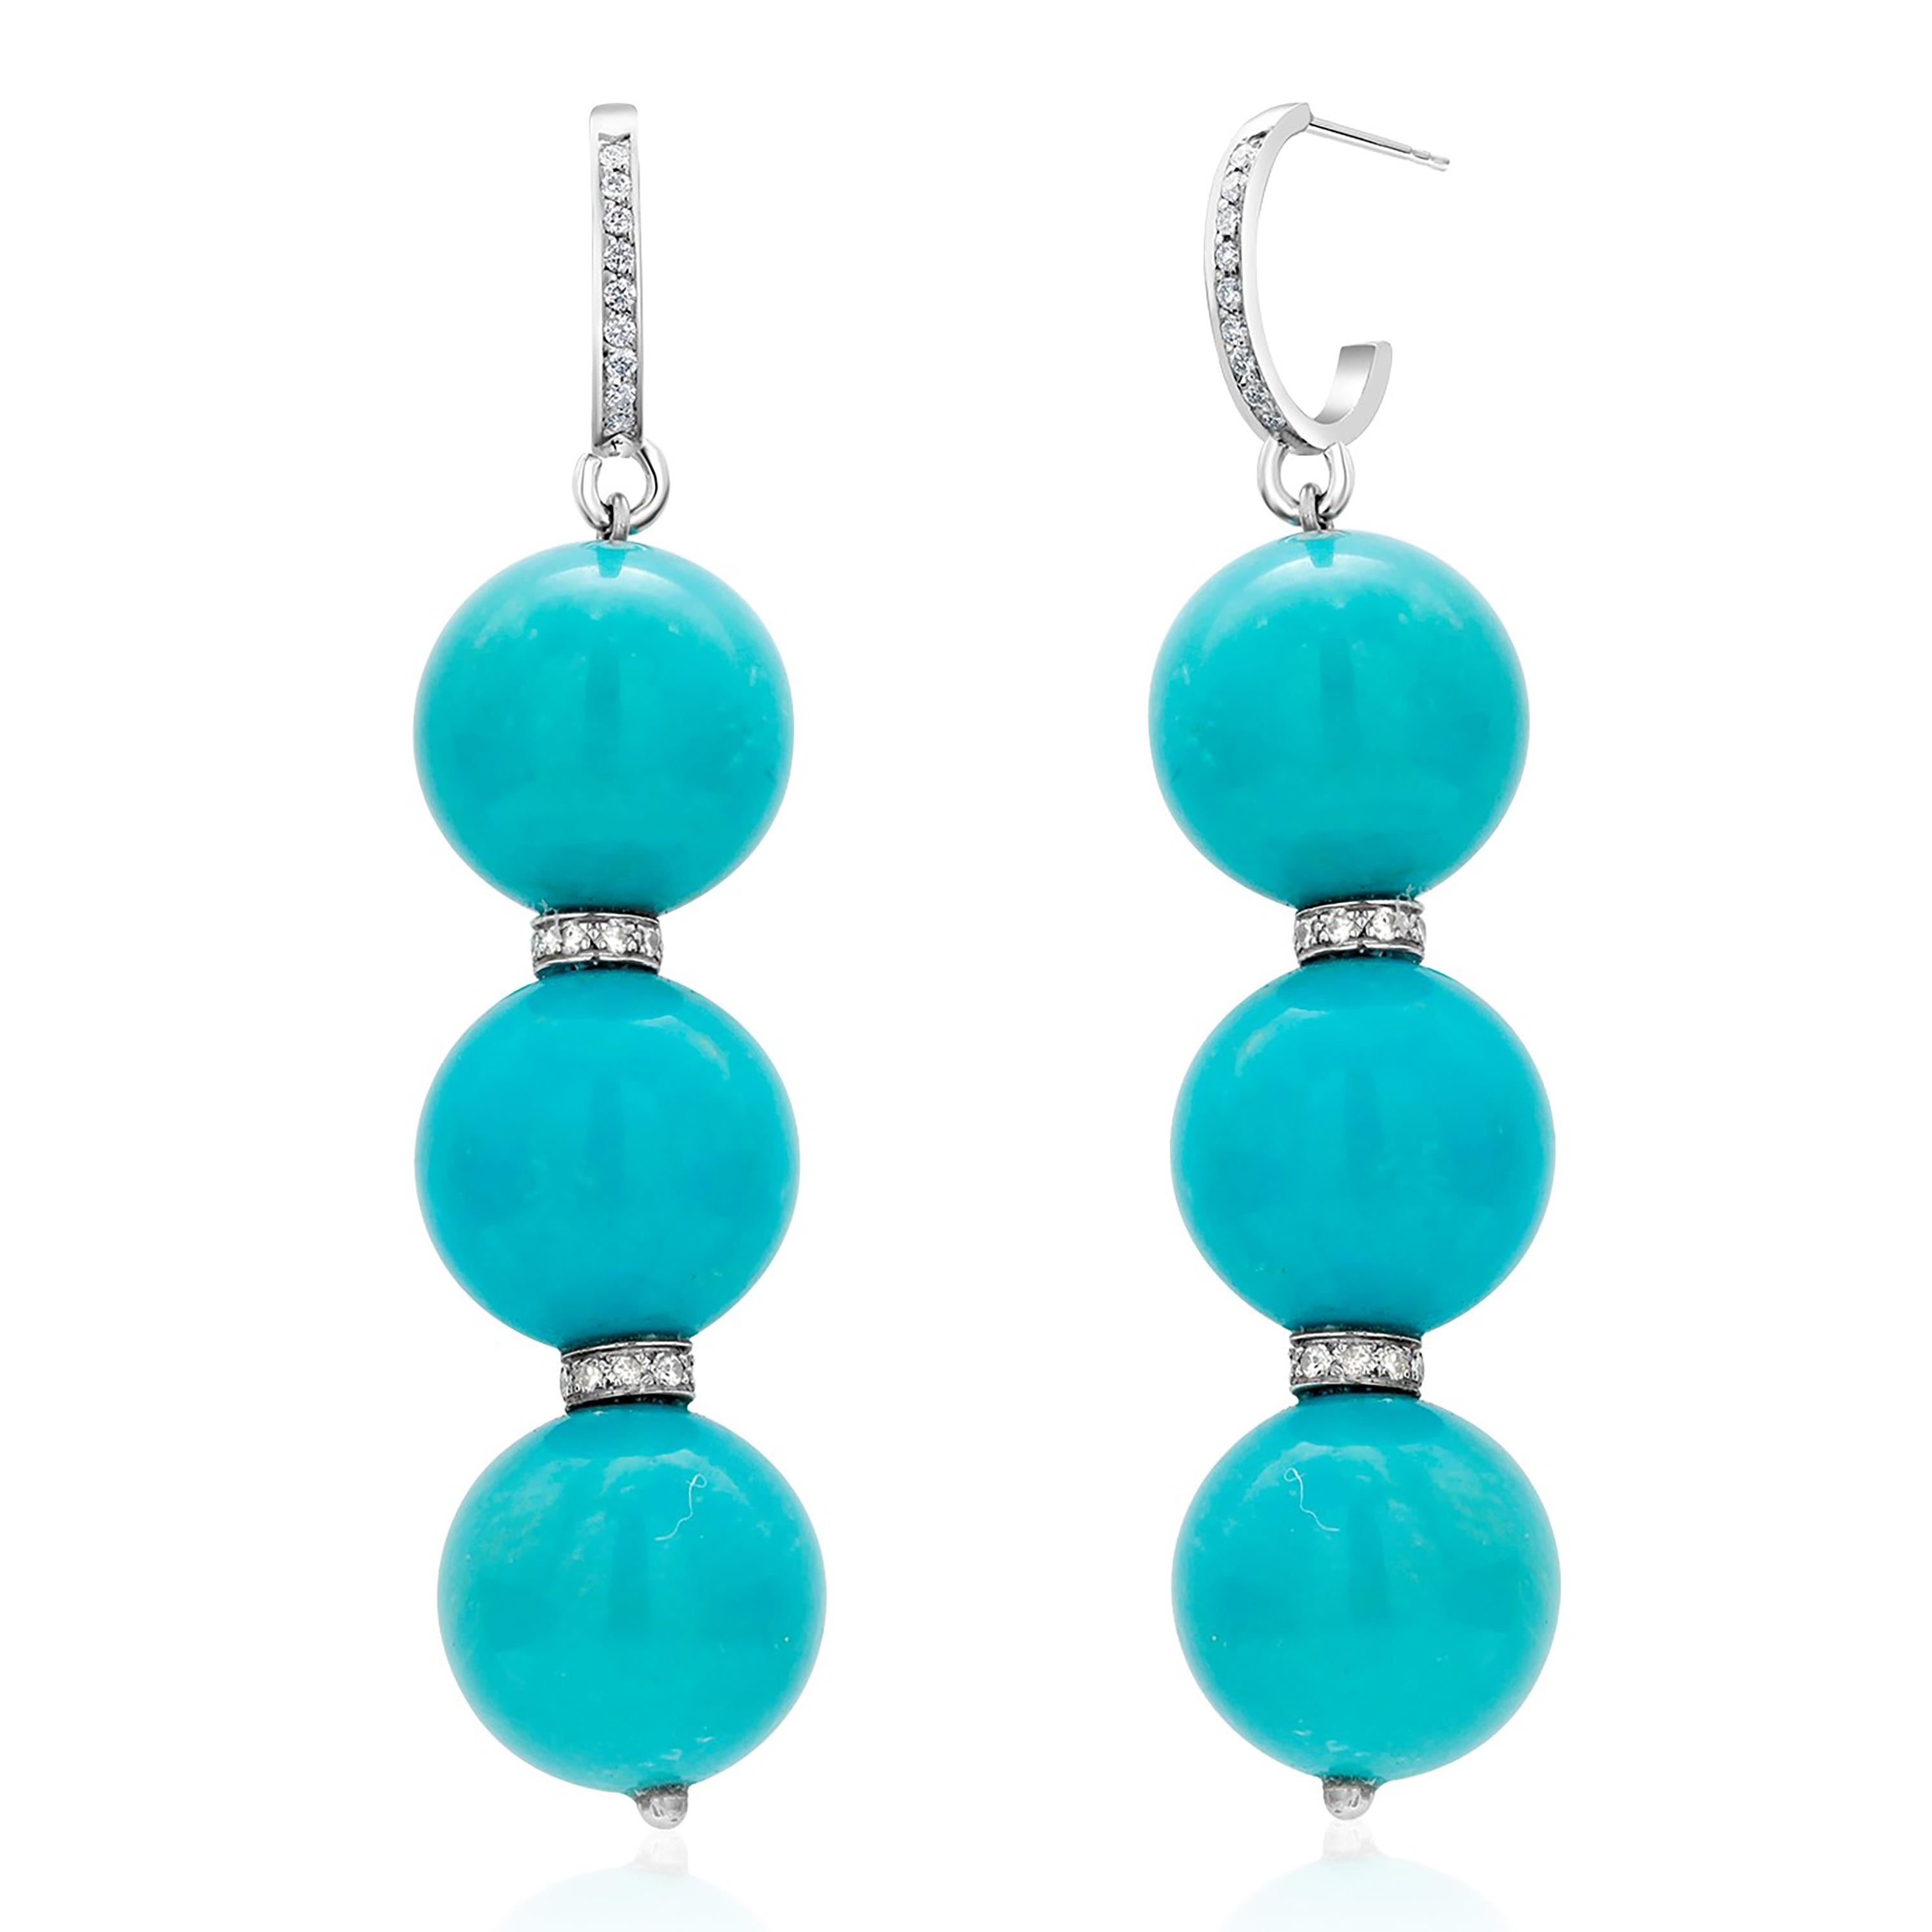 Contemporary White Gold Turquoise Bead Hoop Earrings with Diamond Rondels 2.25 Inch Long